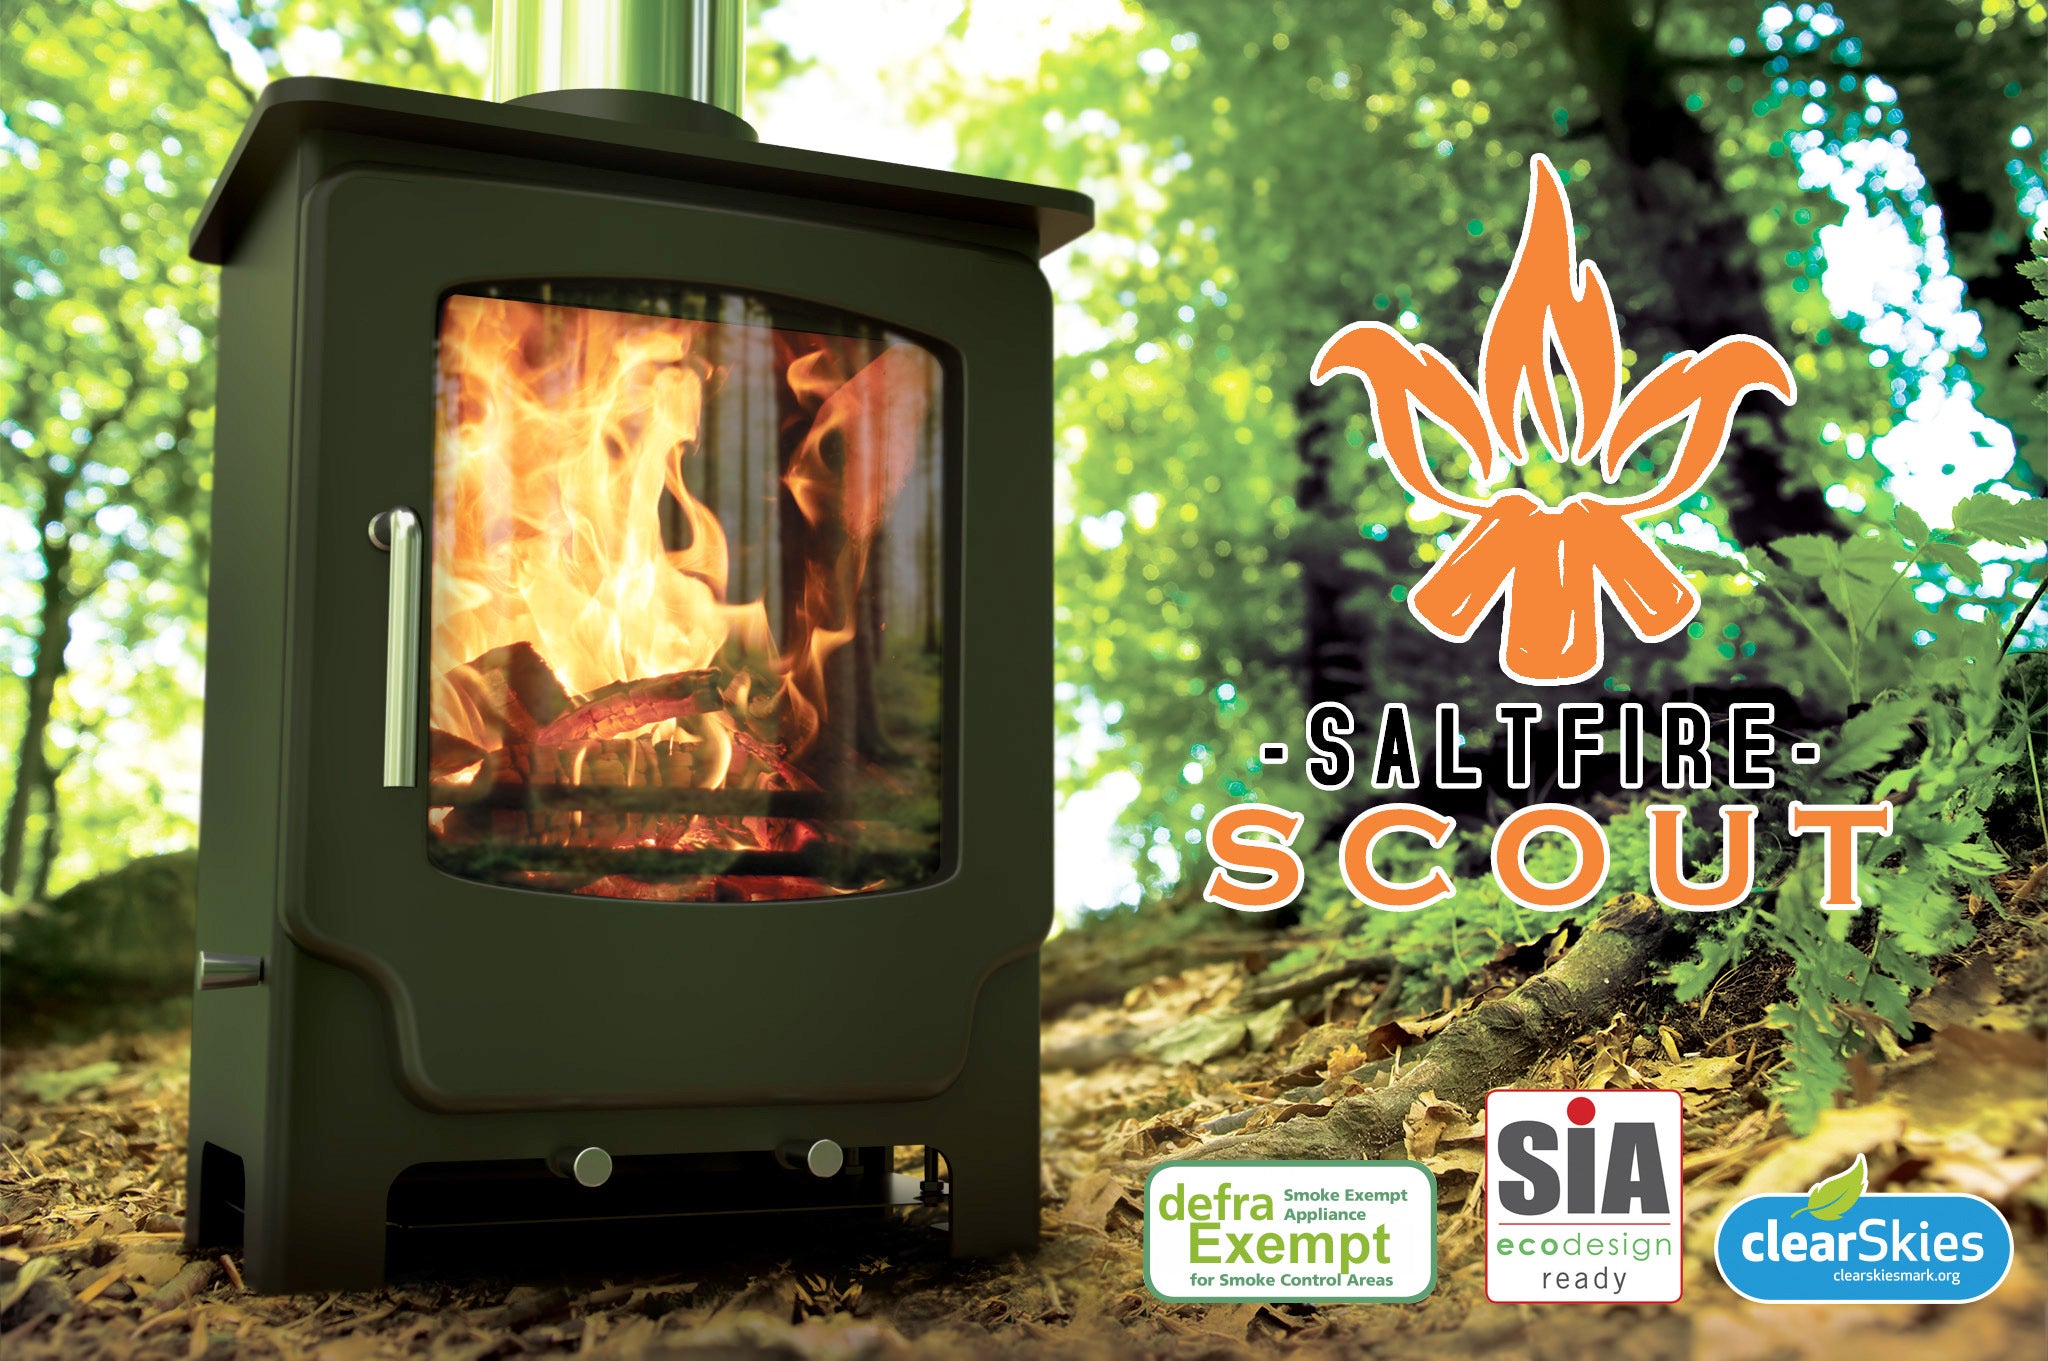 Saltfire Scout Multi-fuel / Wood Burning Stove